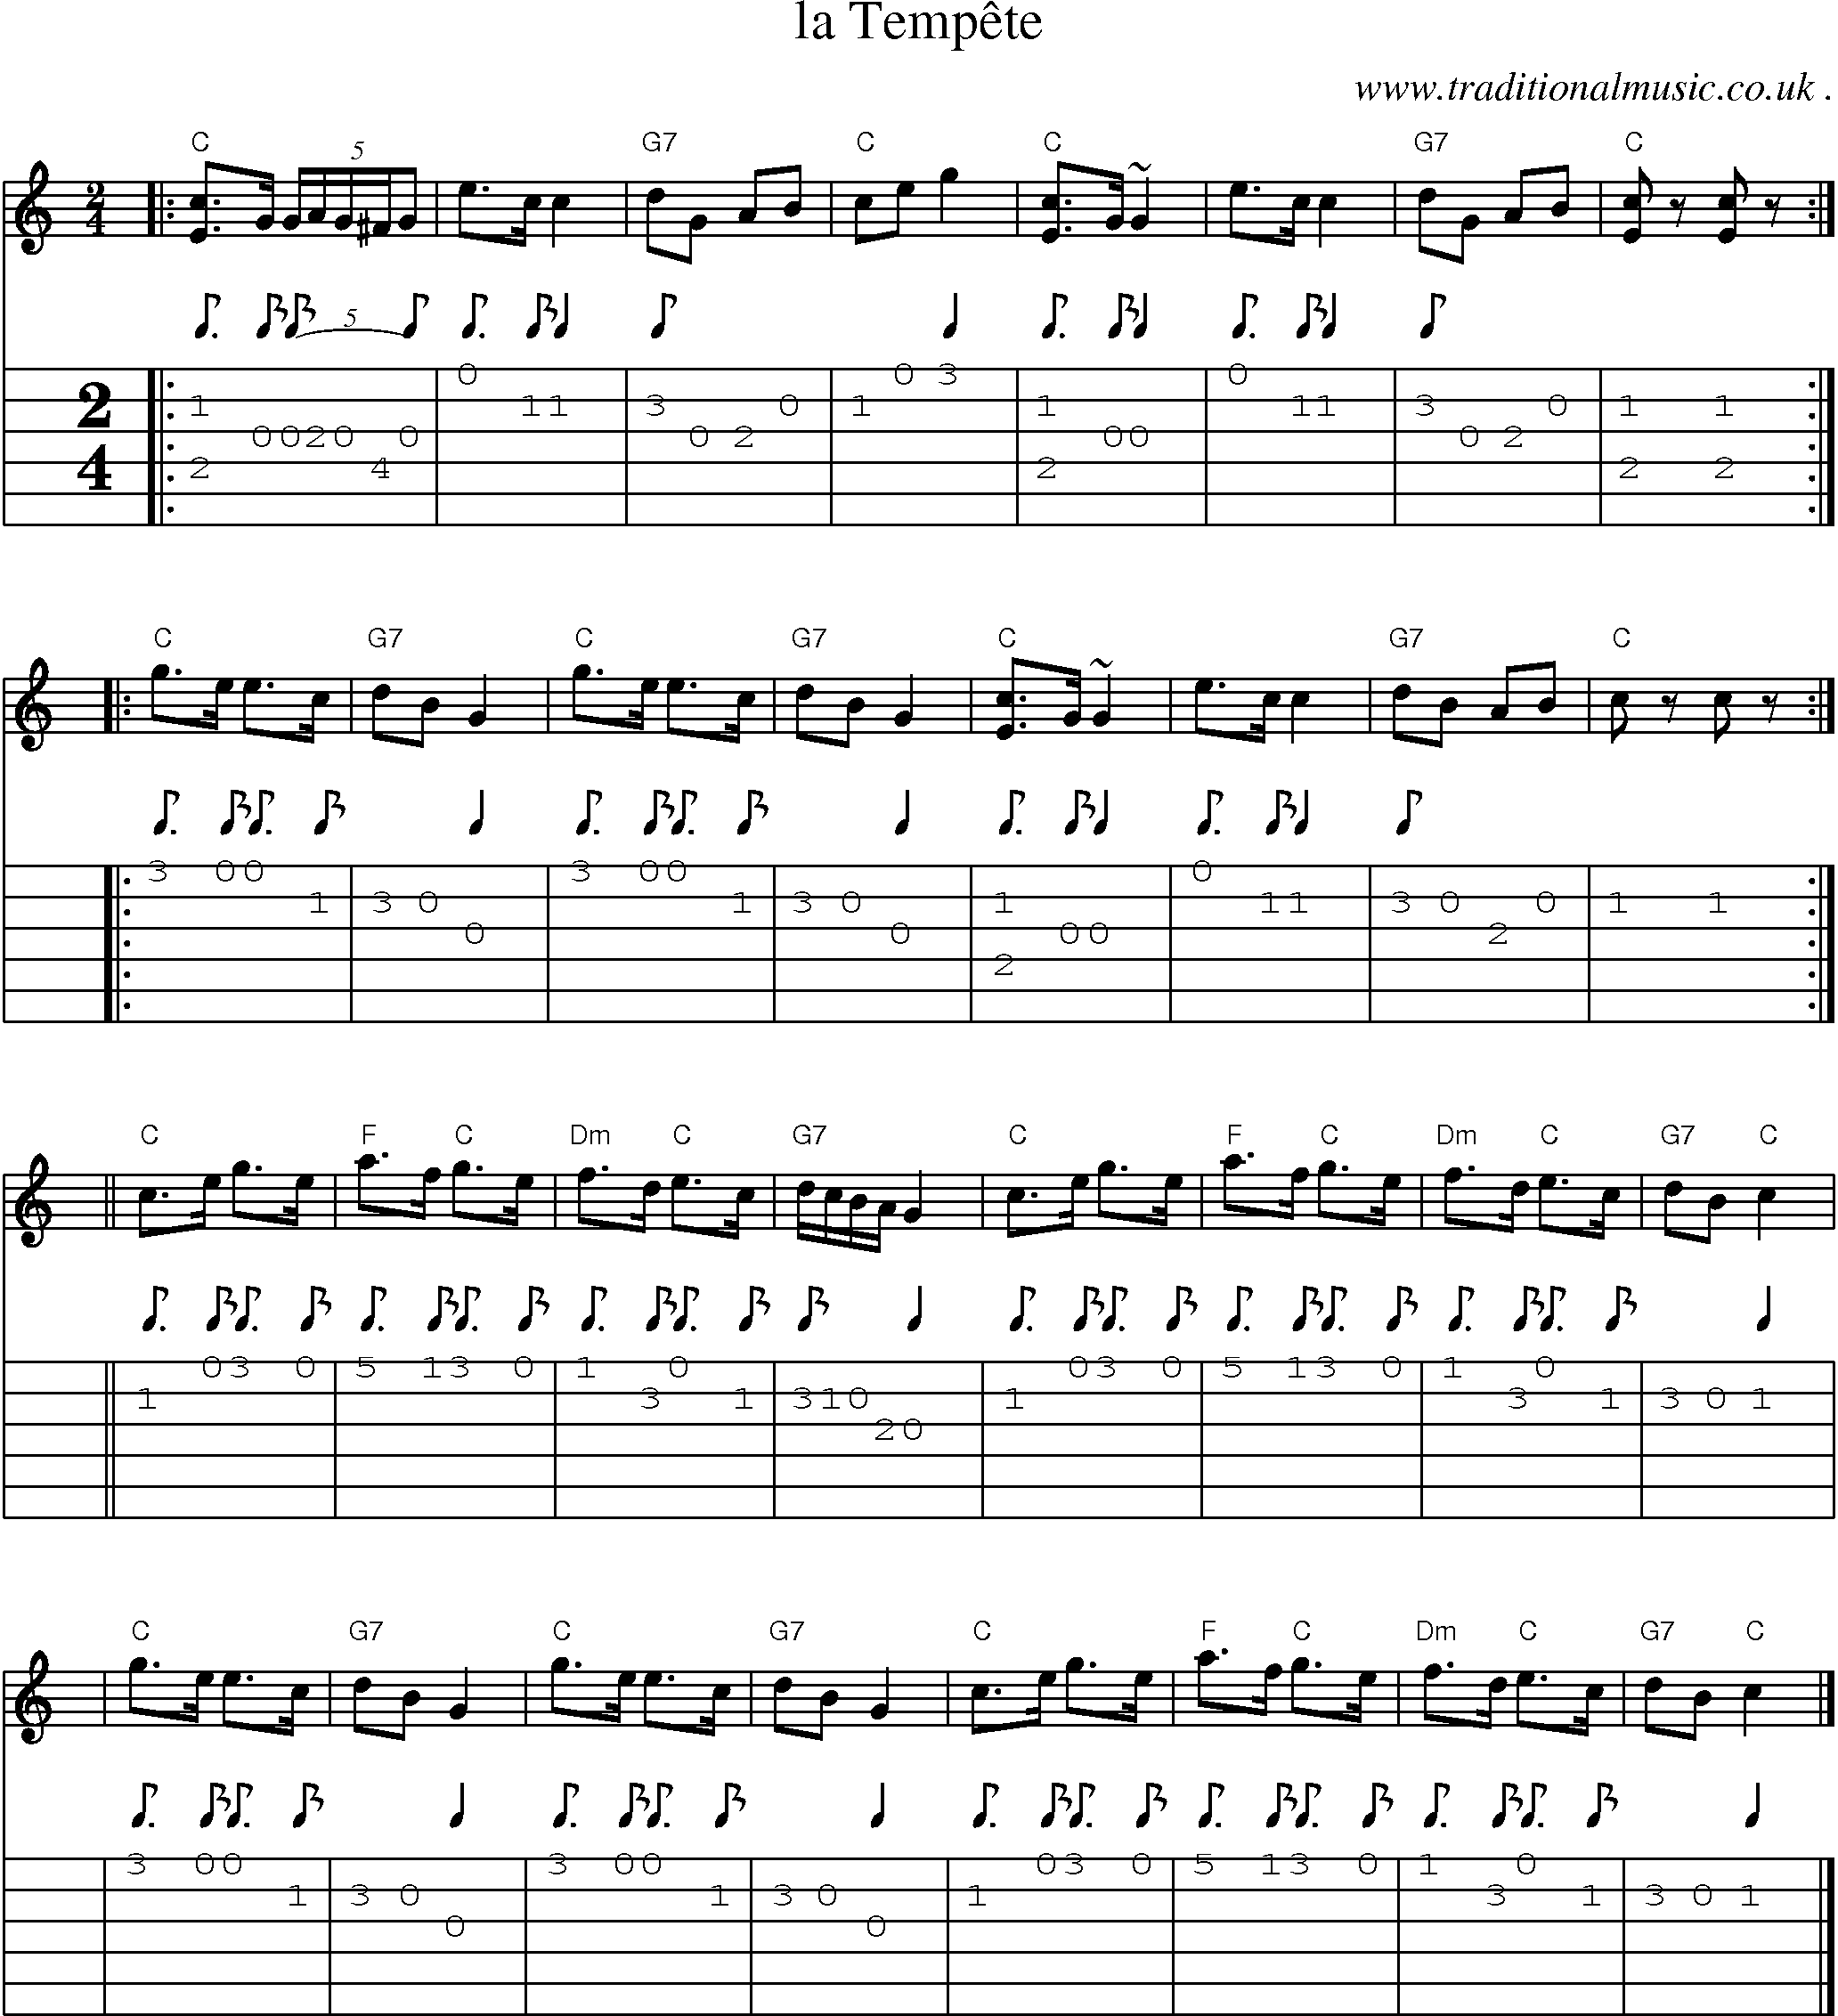 Sheet-music  score, Chords and Guitar Tabs for La Tempete